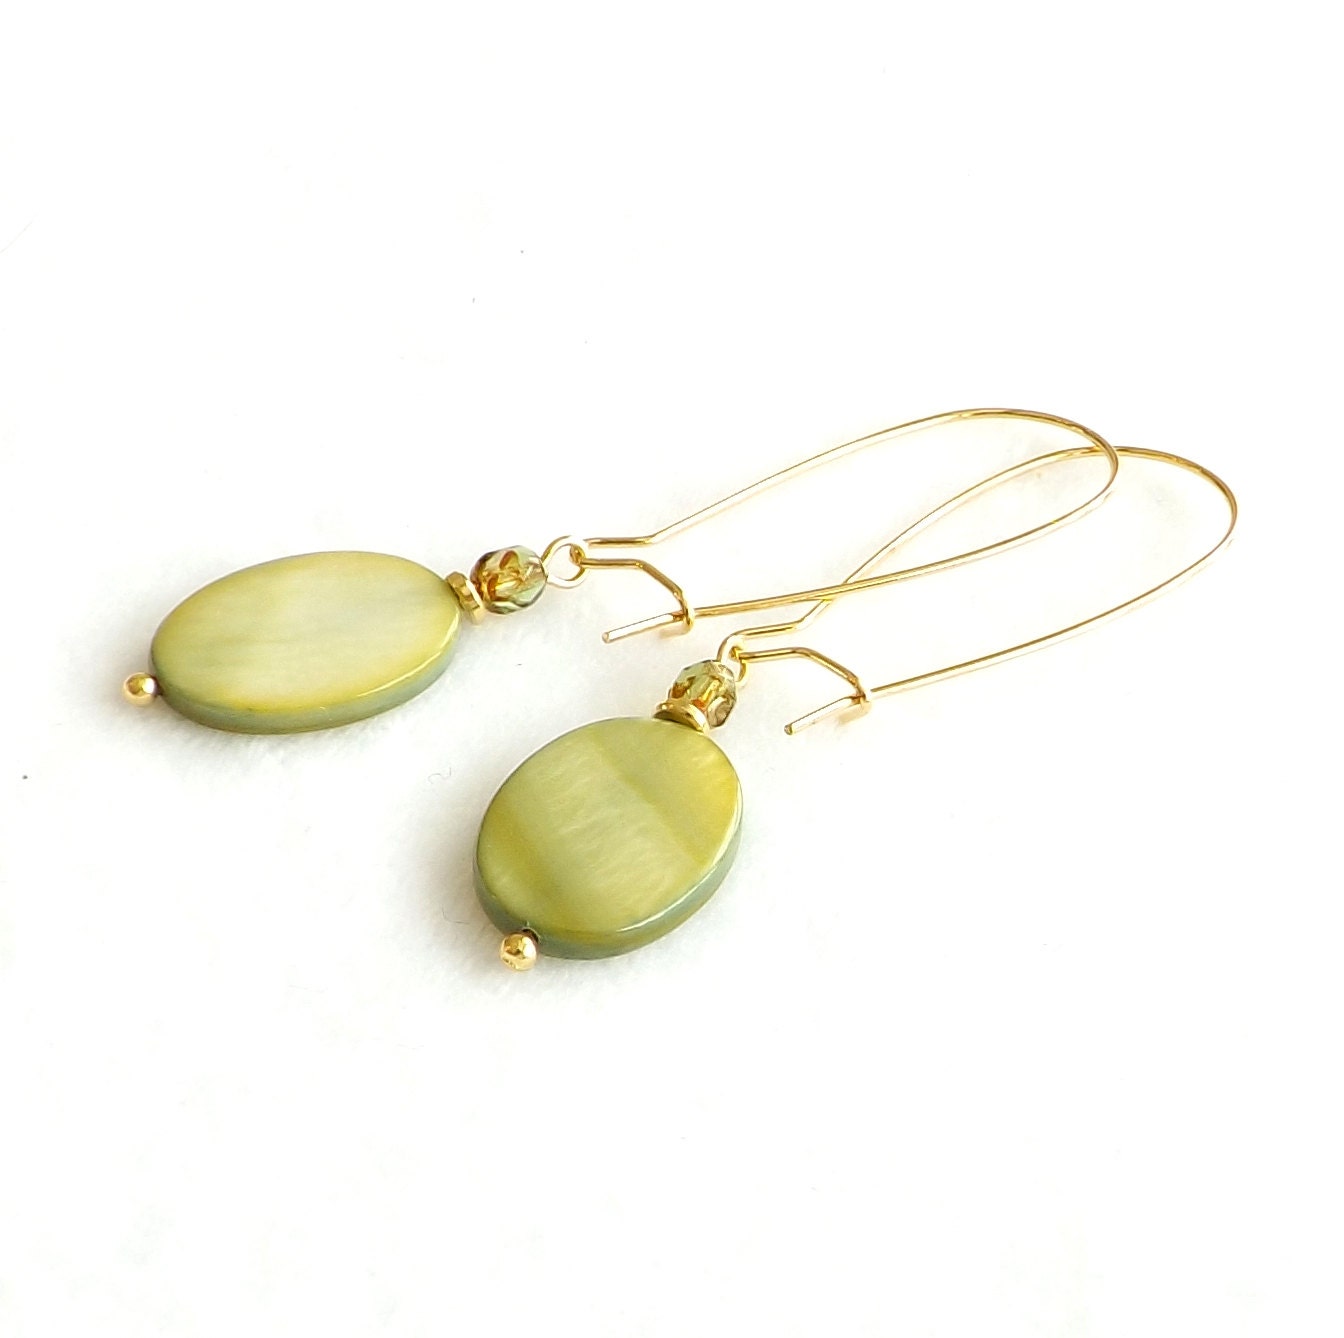 Green Pearl Boho Earrings Olive Lime Mother of Pearl Gold Contemporary Jewelry 2014 Trends Valentine Gift Idea Guide Spring Finds Under 25 - connectionsbymaya